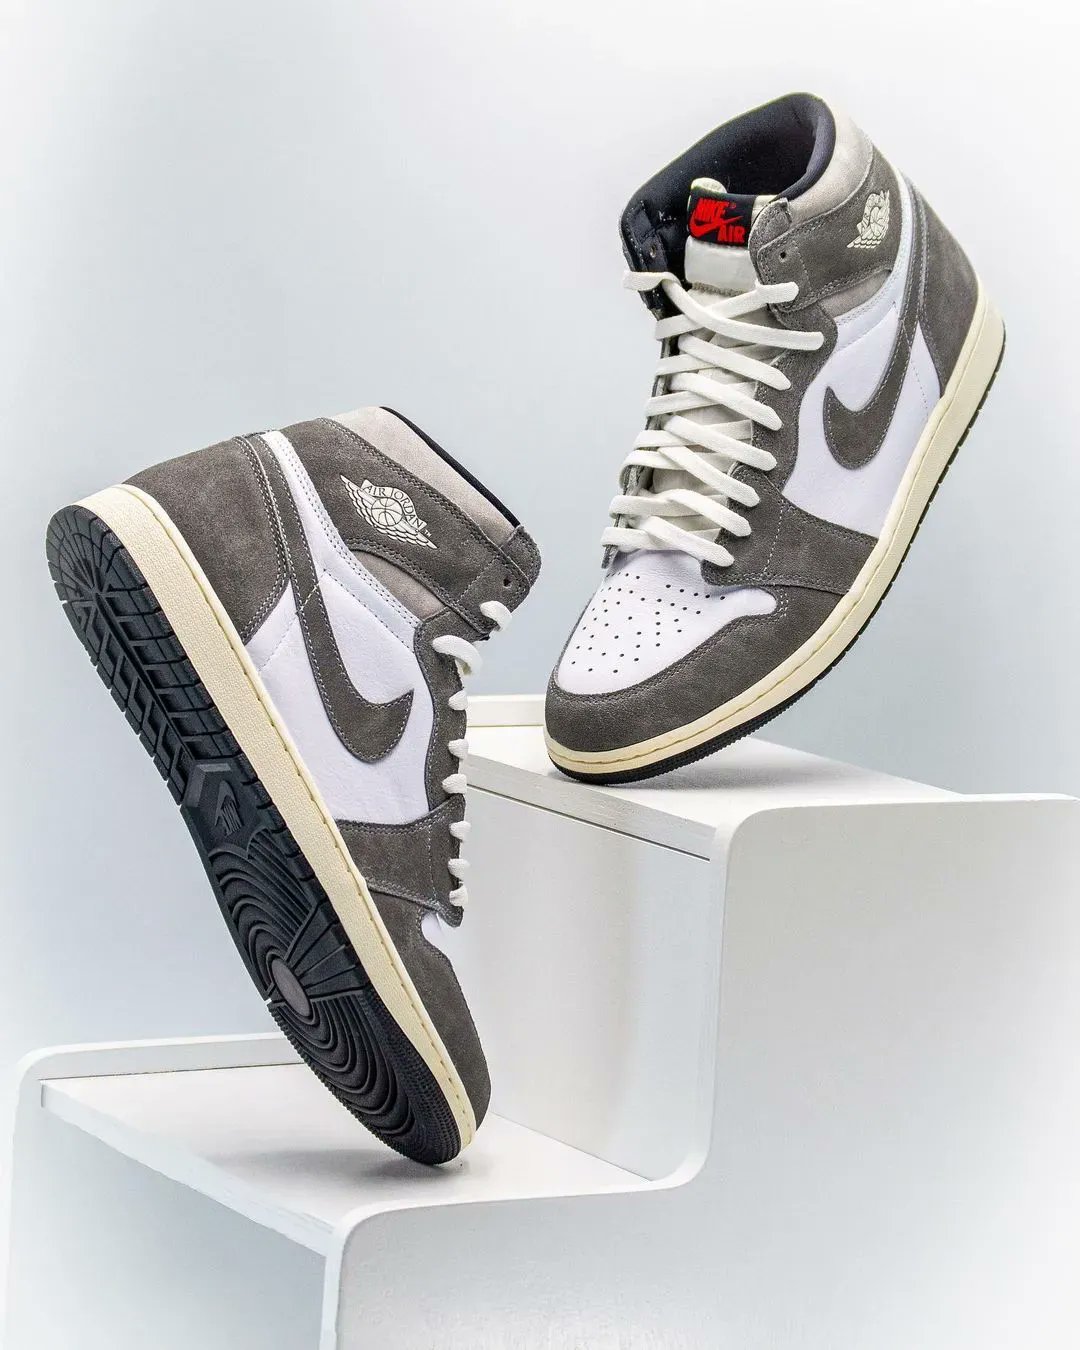 Sneaker News on X: Air Jordan 1 Washed Heritage 🧼 Has this